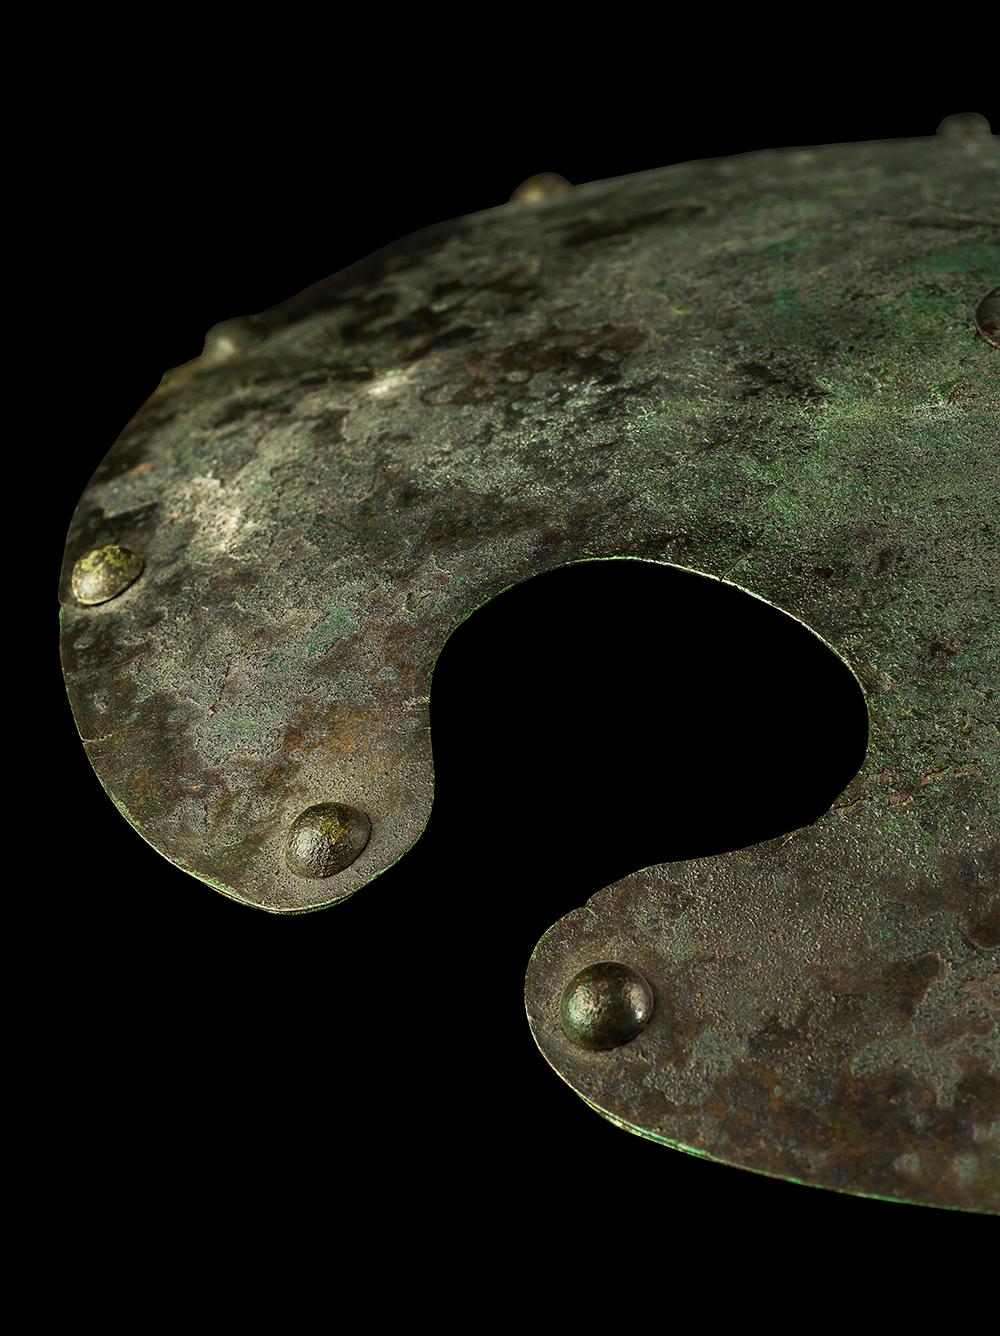 An unusual and remarkably well-preserved bronze shield, most likely of Persian origin. Oval and slightly convex, consisting of bronze sheets riveted together, with the rivet heads visible as a decorative effect round the rim and a central studded